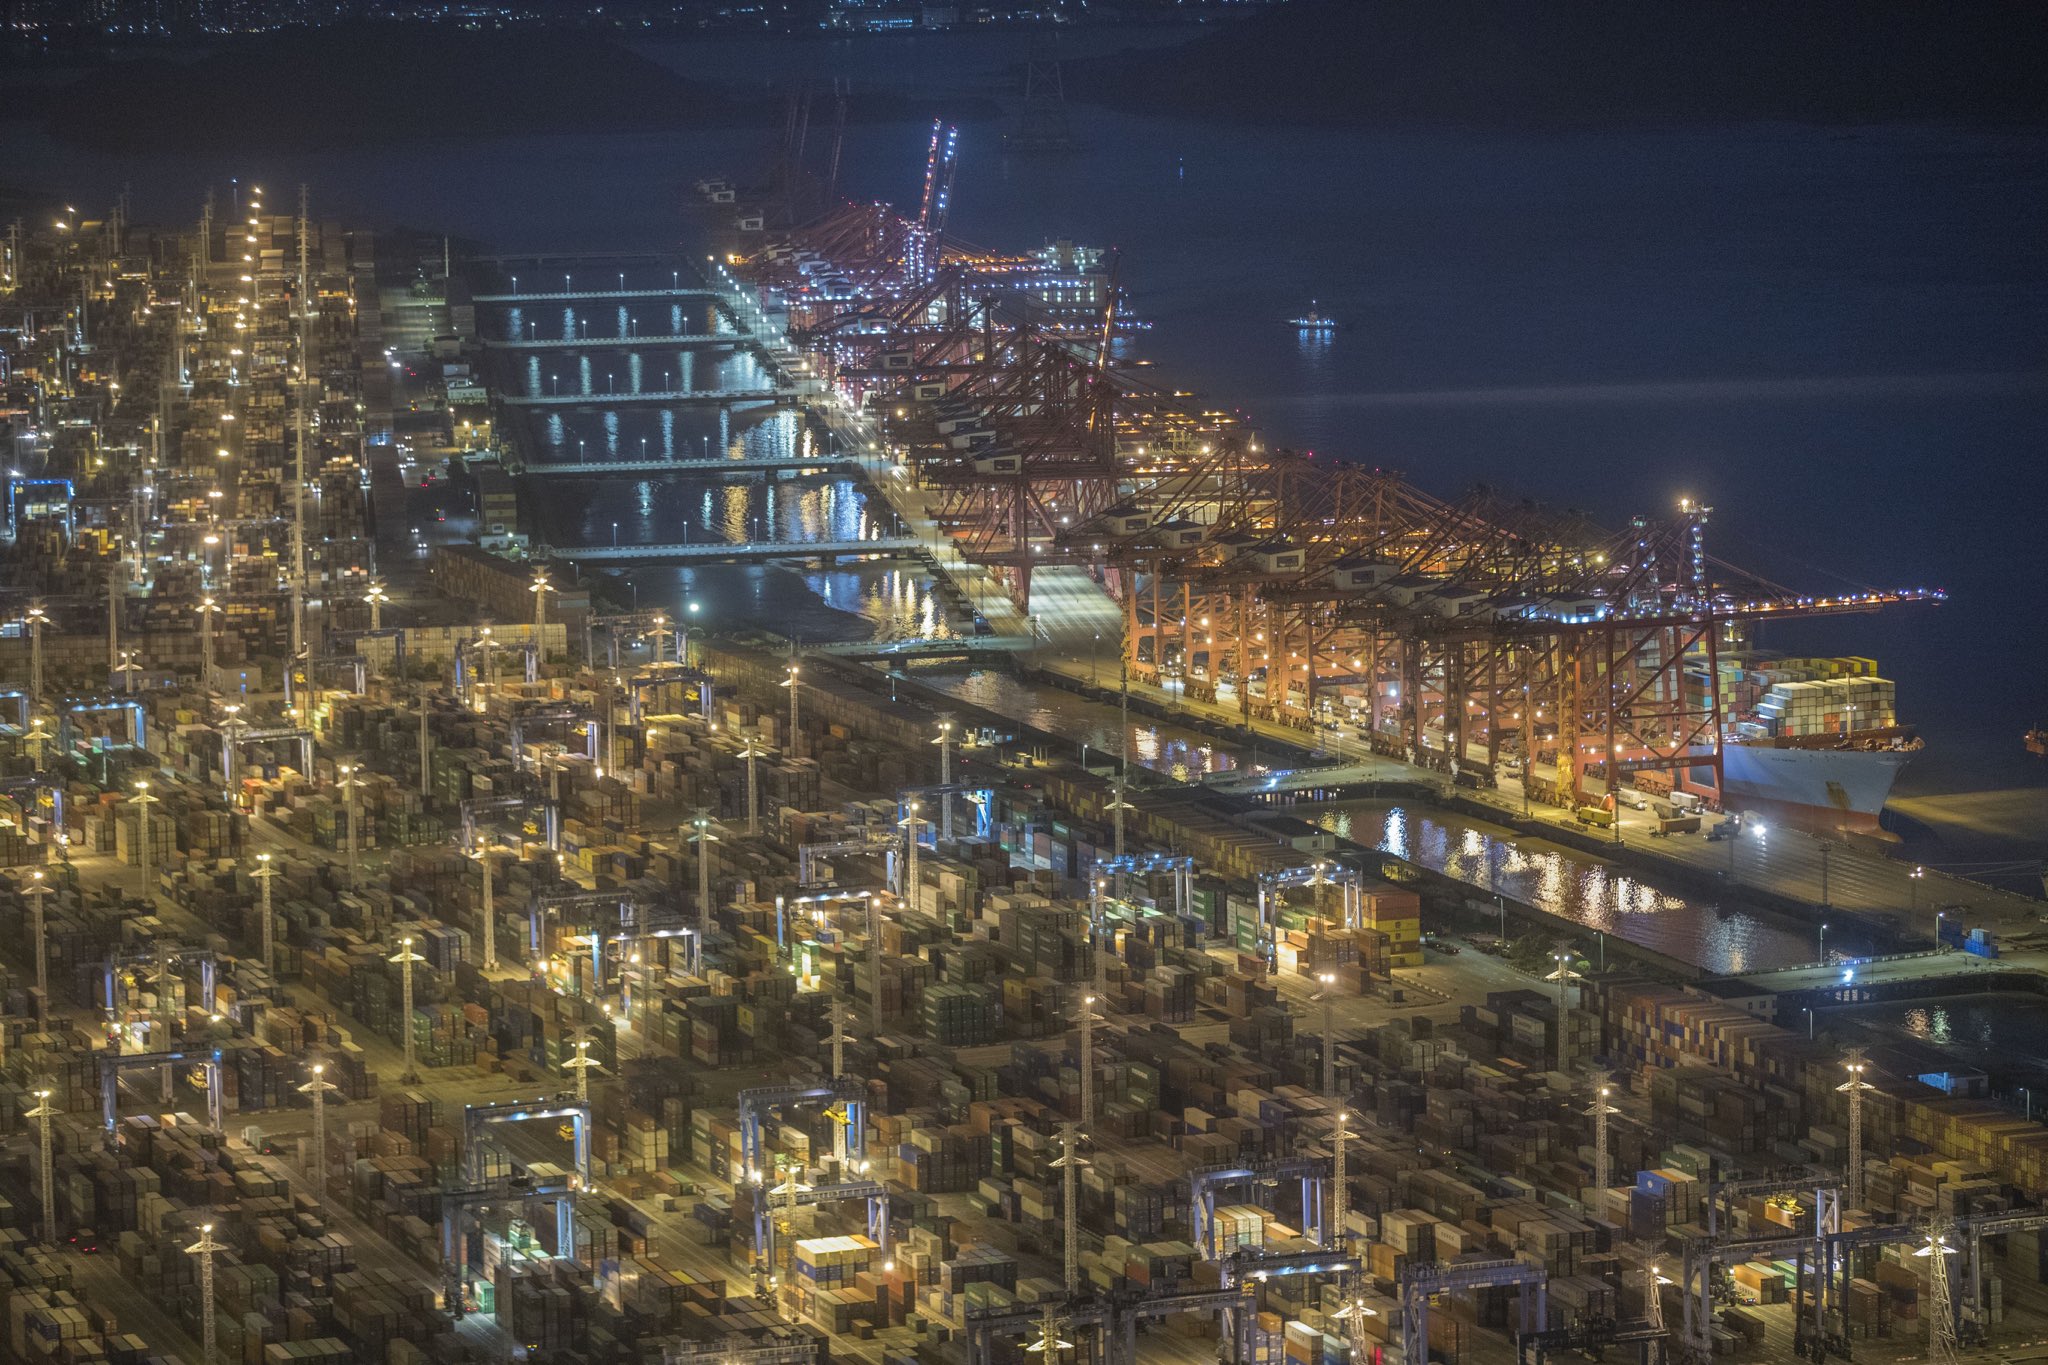 Cctv Asia Pacific A Beautiful Nightscape Came To China Zhejiang Zhoushanport On Tuesday The World S Busiest Port Was Fantastic When Lights Were Turned On At Sunset 年4月7日 中国 浙江